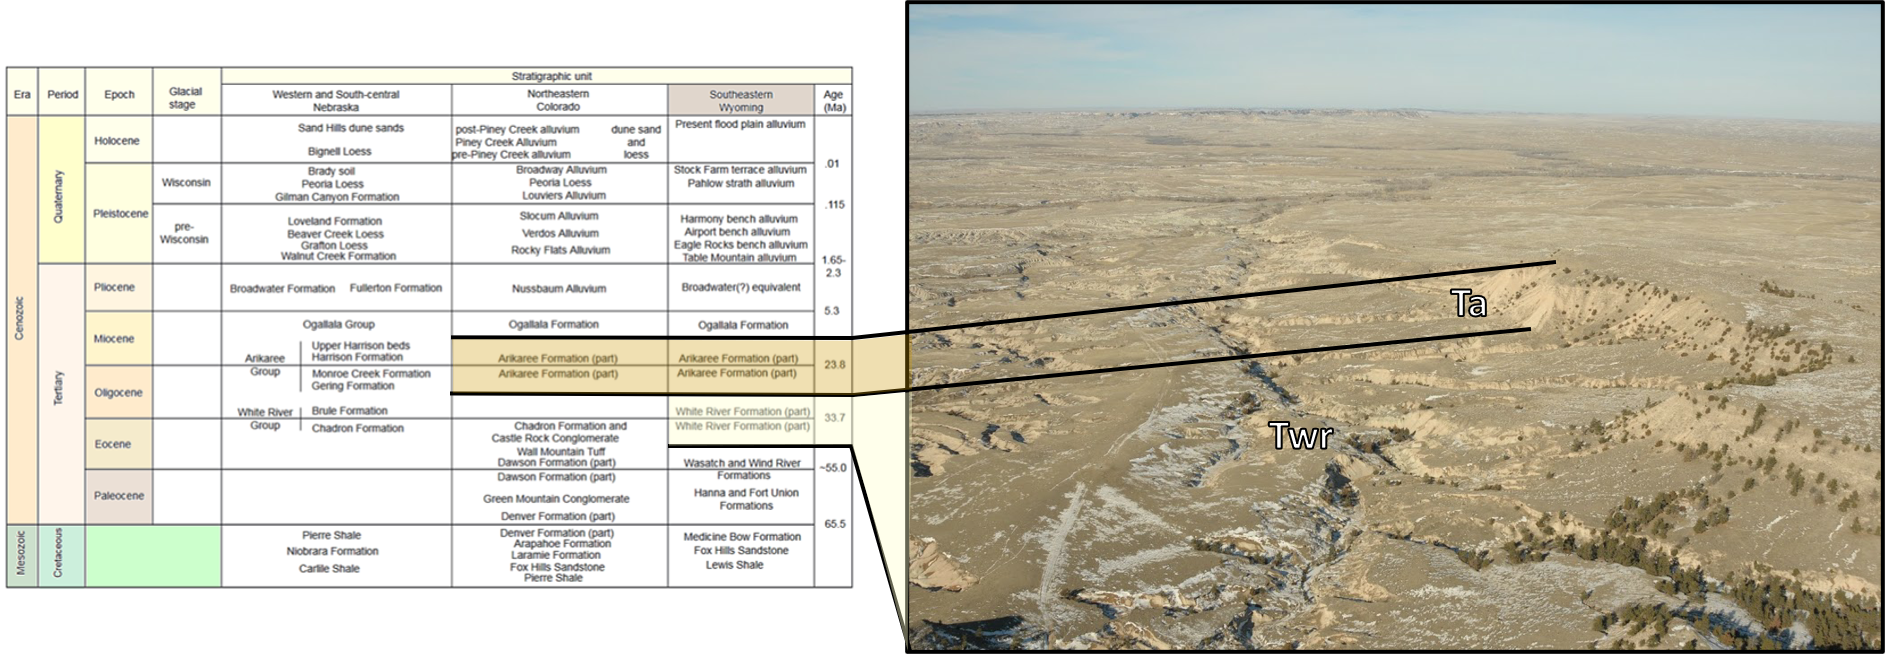 Cenozoic stratigraphic column for High Plains region and picture of Hat Breaks escarpment, Wyoming